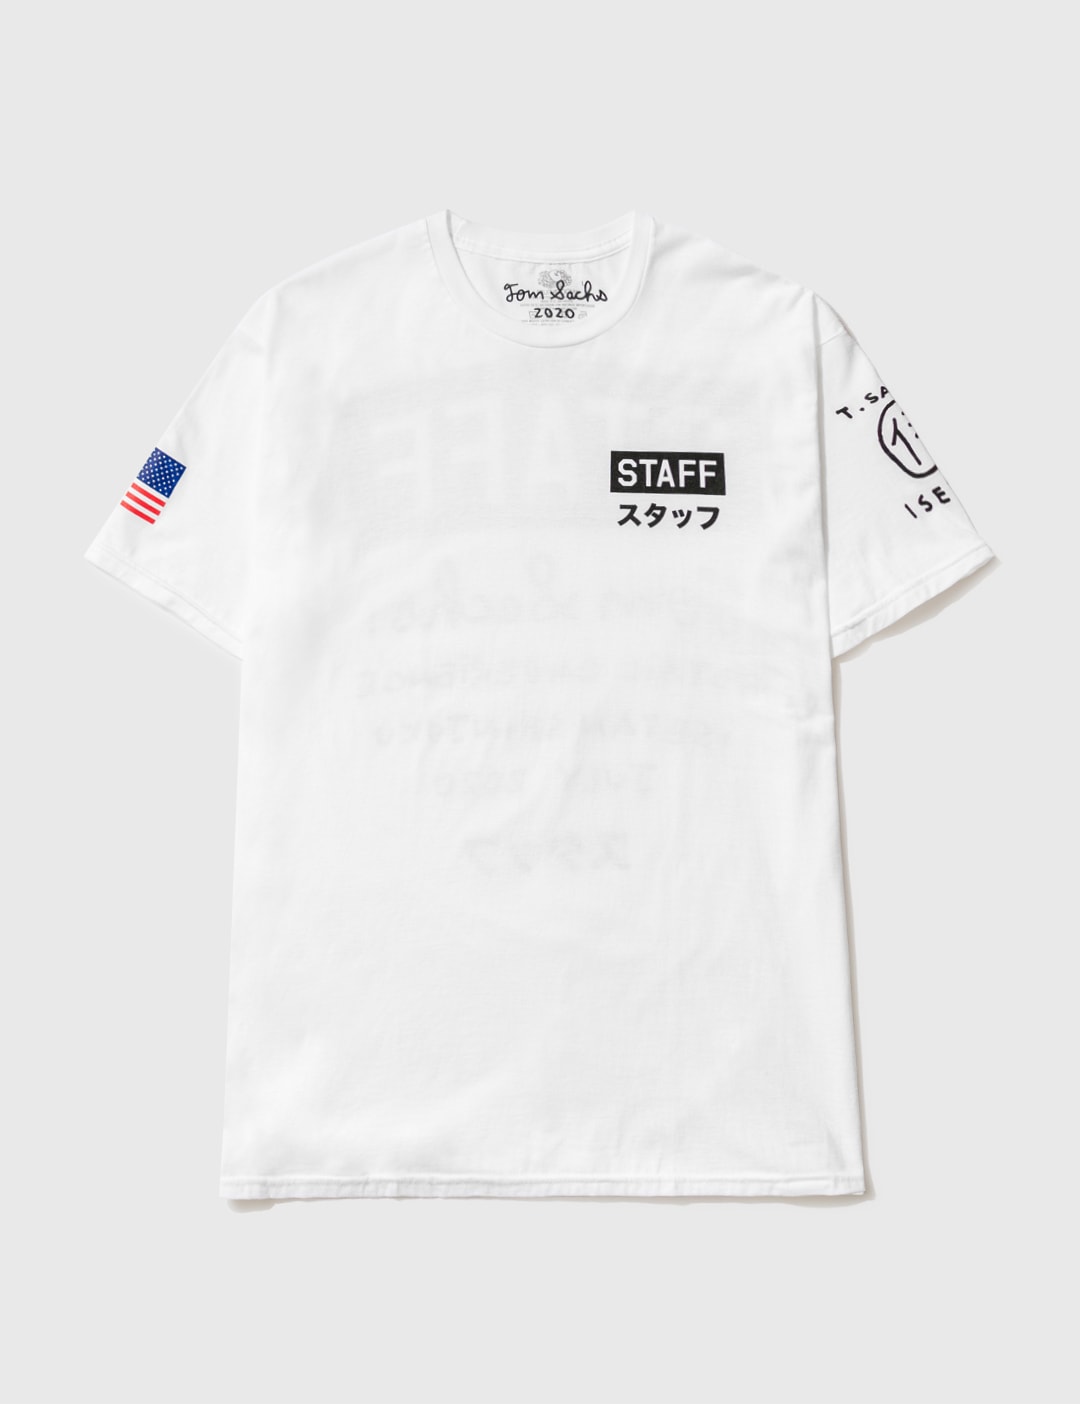 kaos Med andre band På daglig basis Tom Sachs - Tom Sachs x Isetan STAFF T-shirt | HBX - Globally Curated  Fashion and Lifestyle by Hypebeast